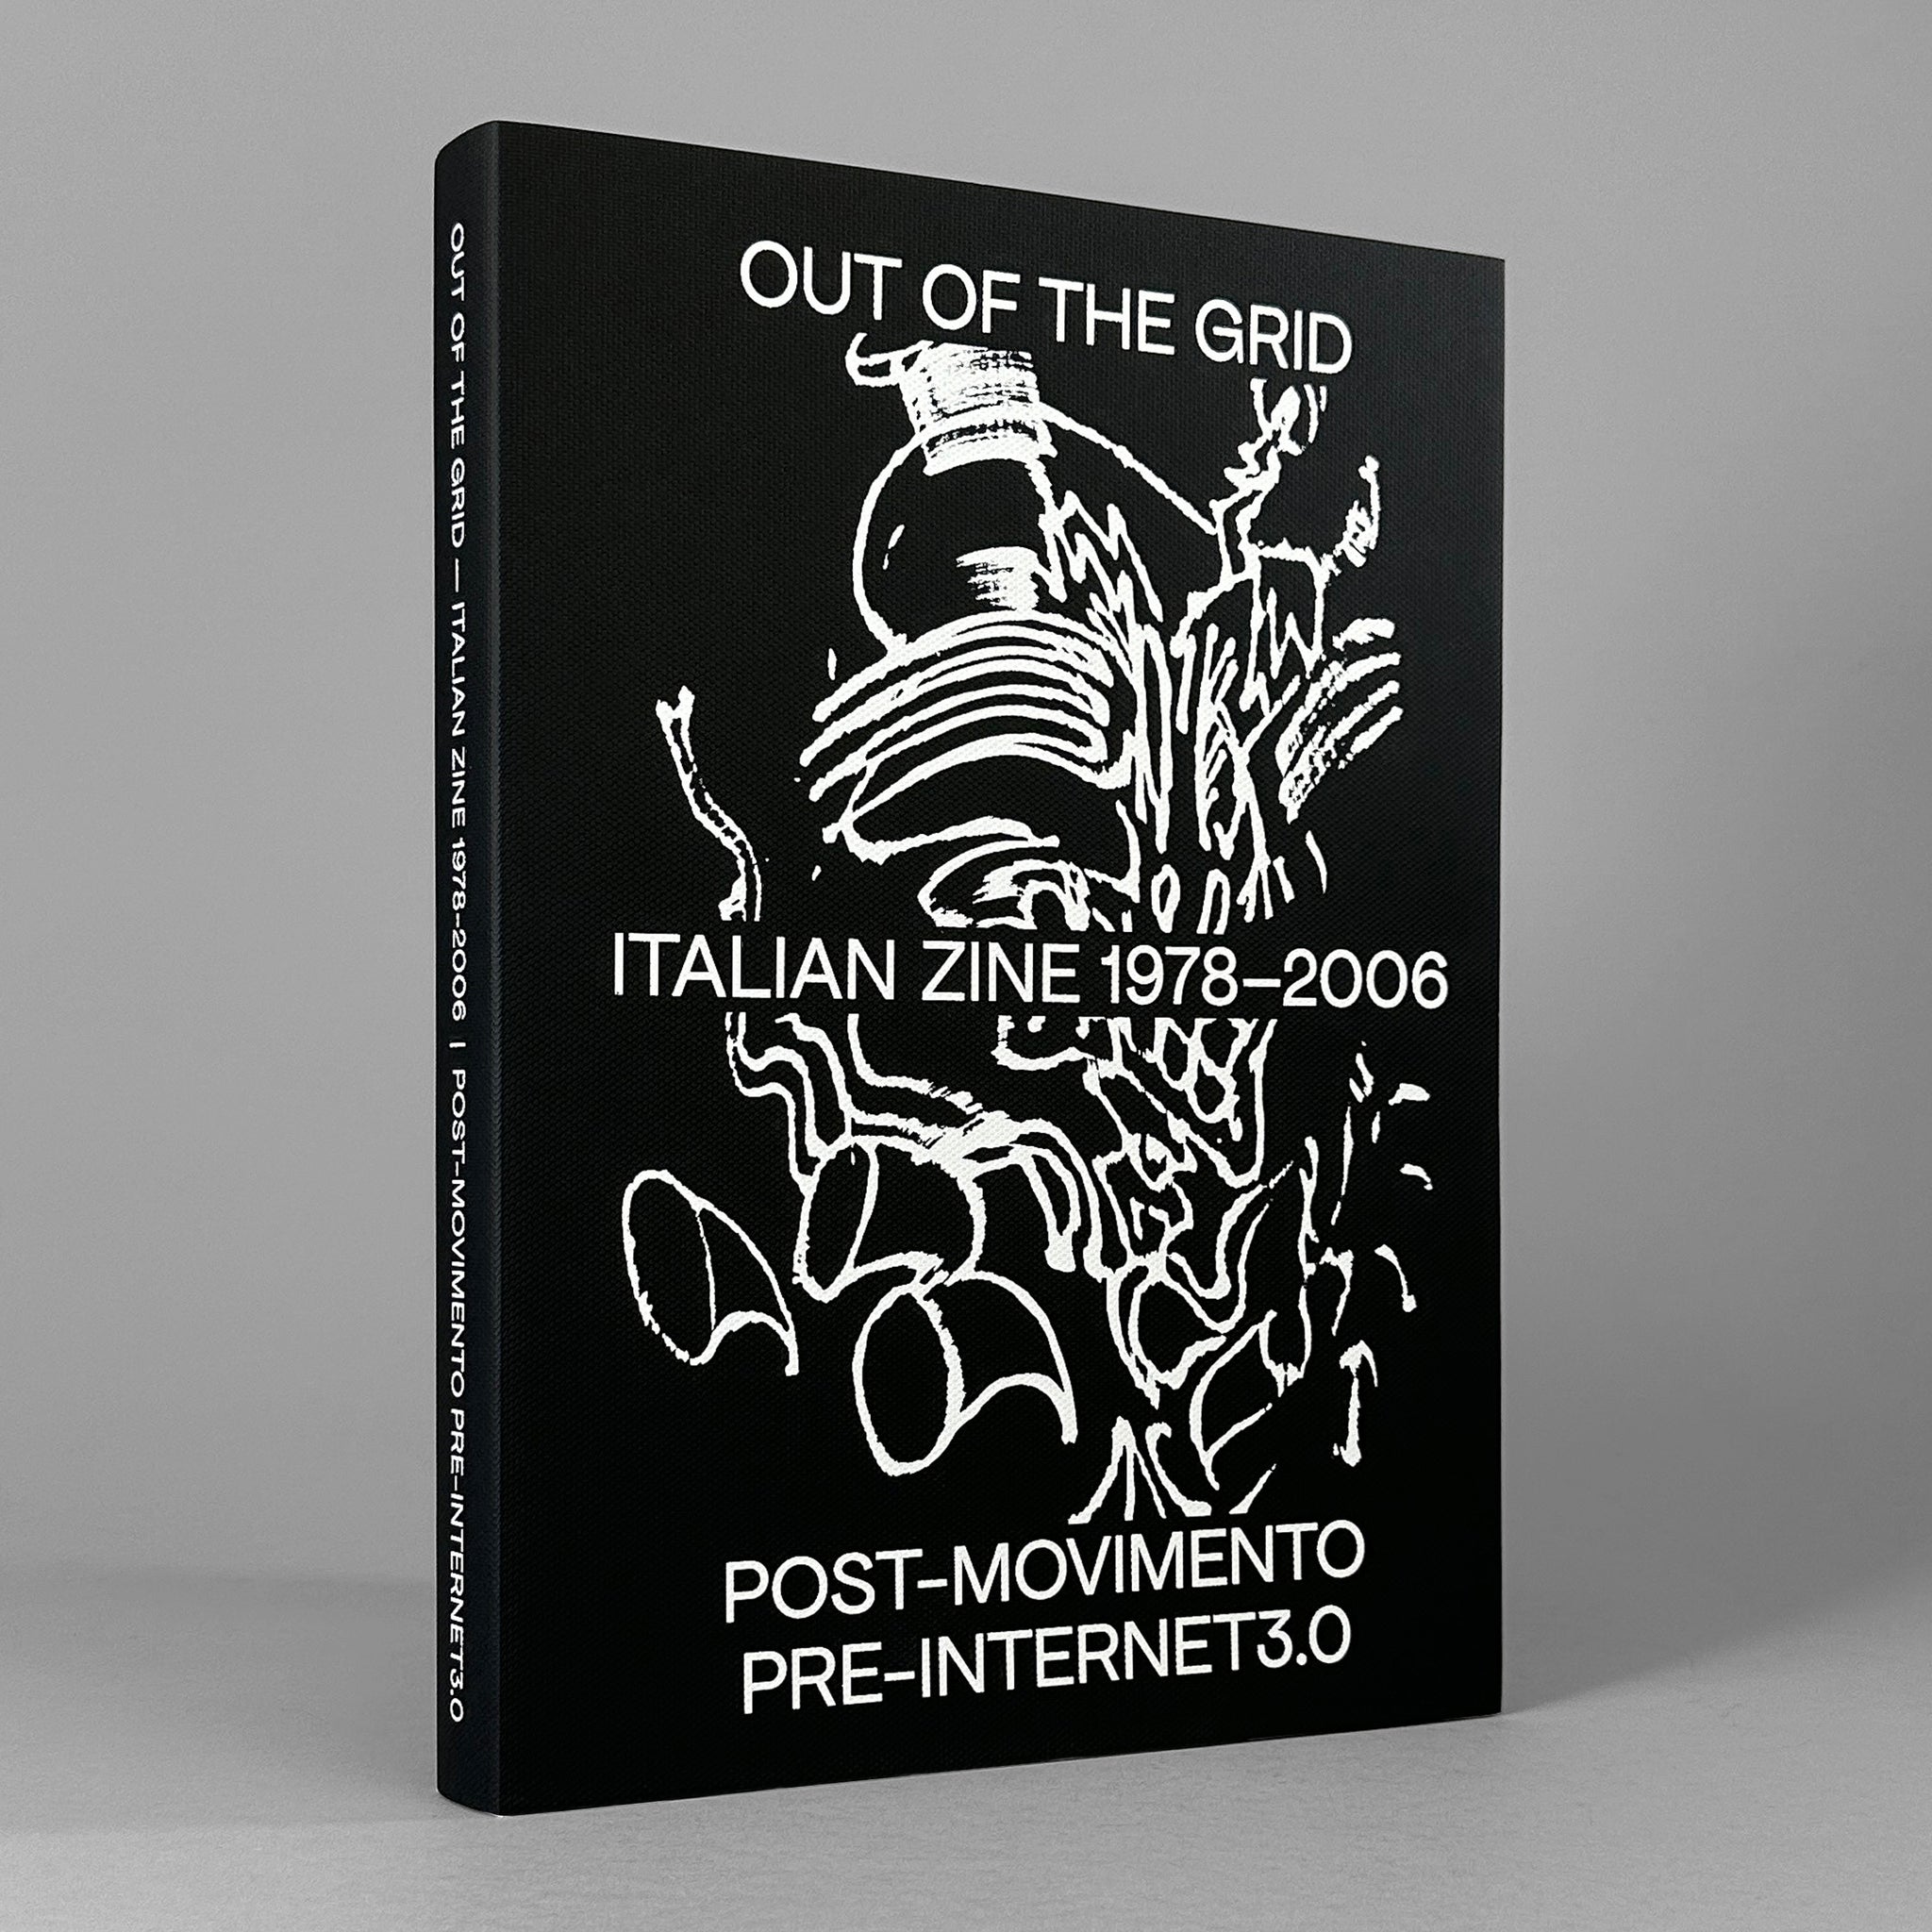 Out of the Grid: Italian Zine 1978-2006